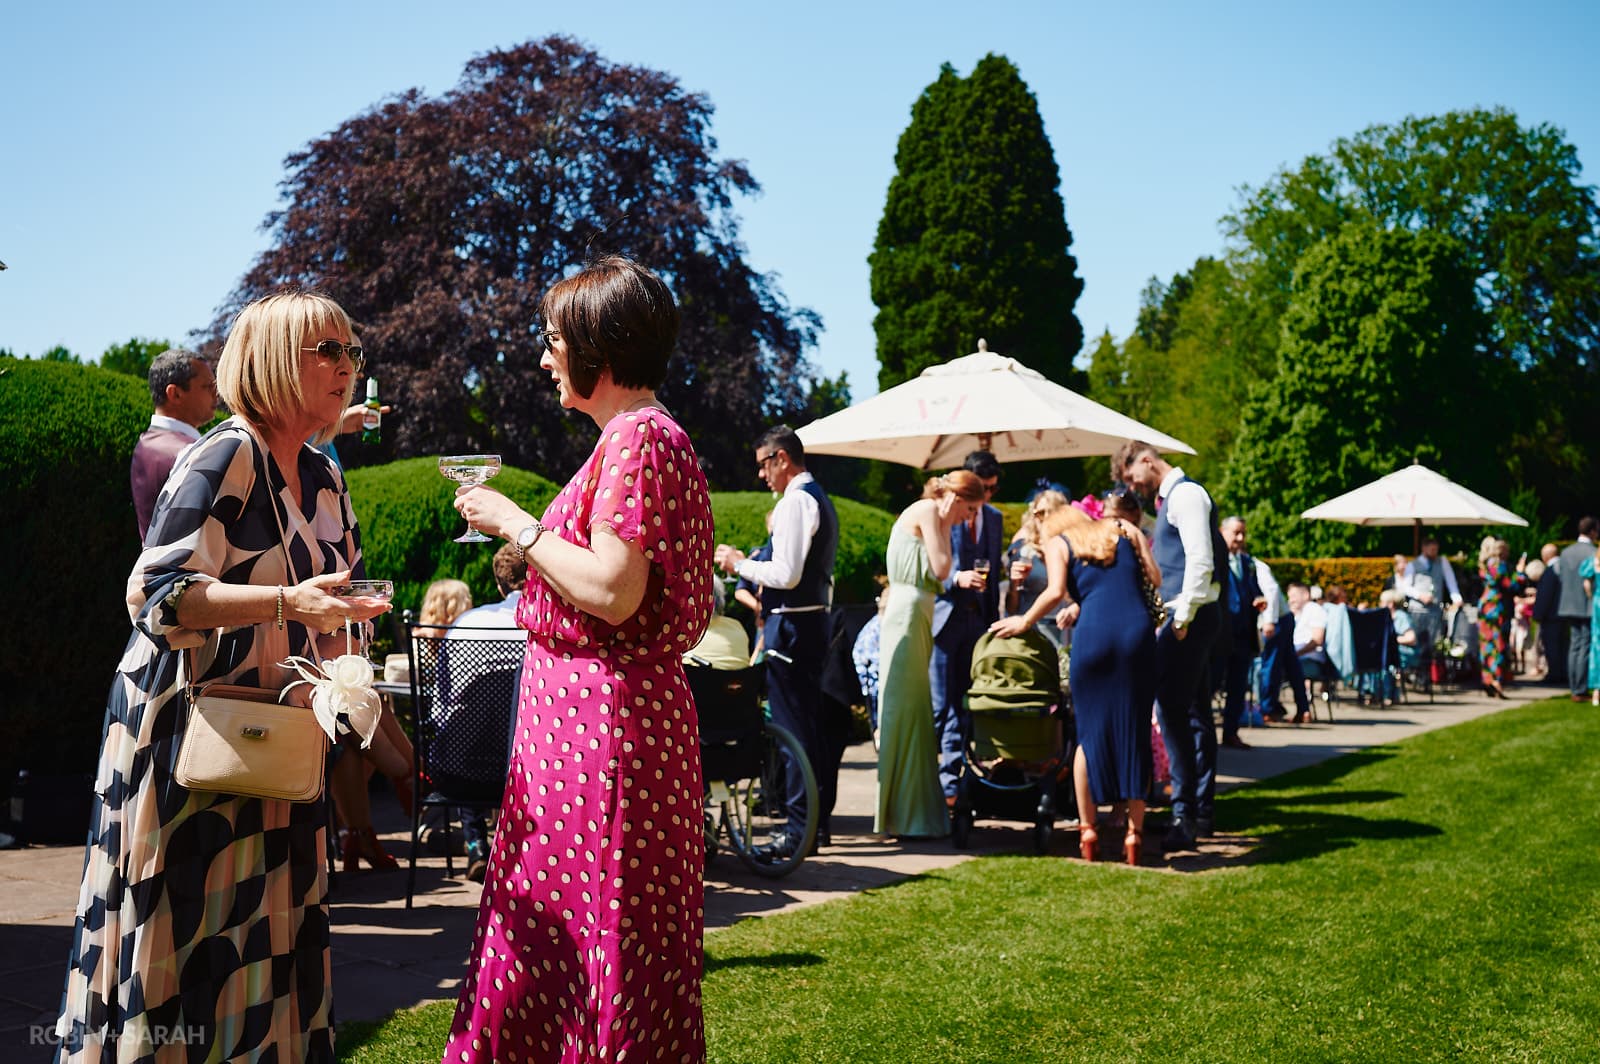 Wedding guests chat and relax on terrace at Coombe Abbey